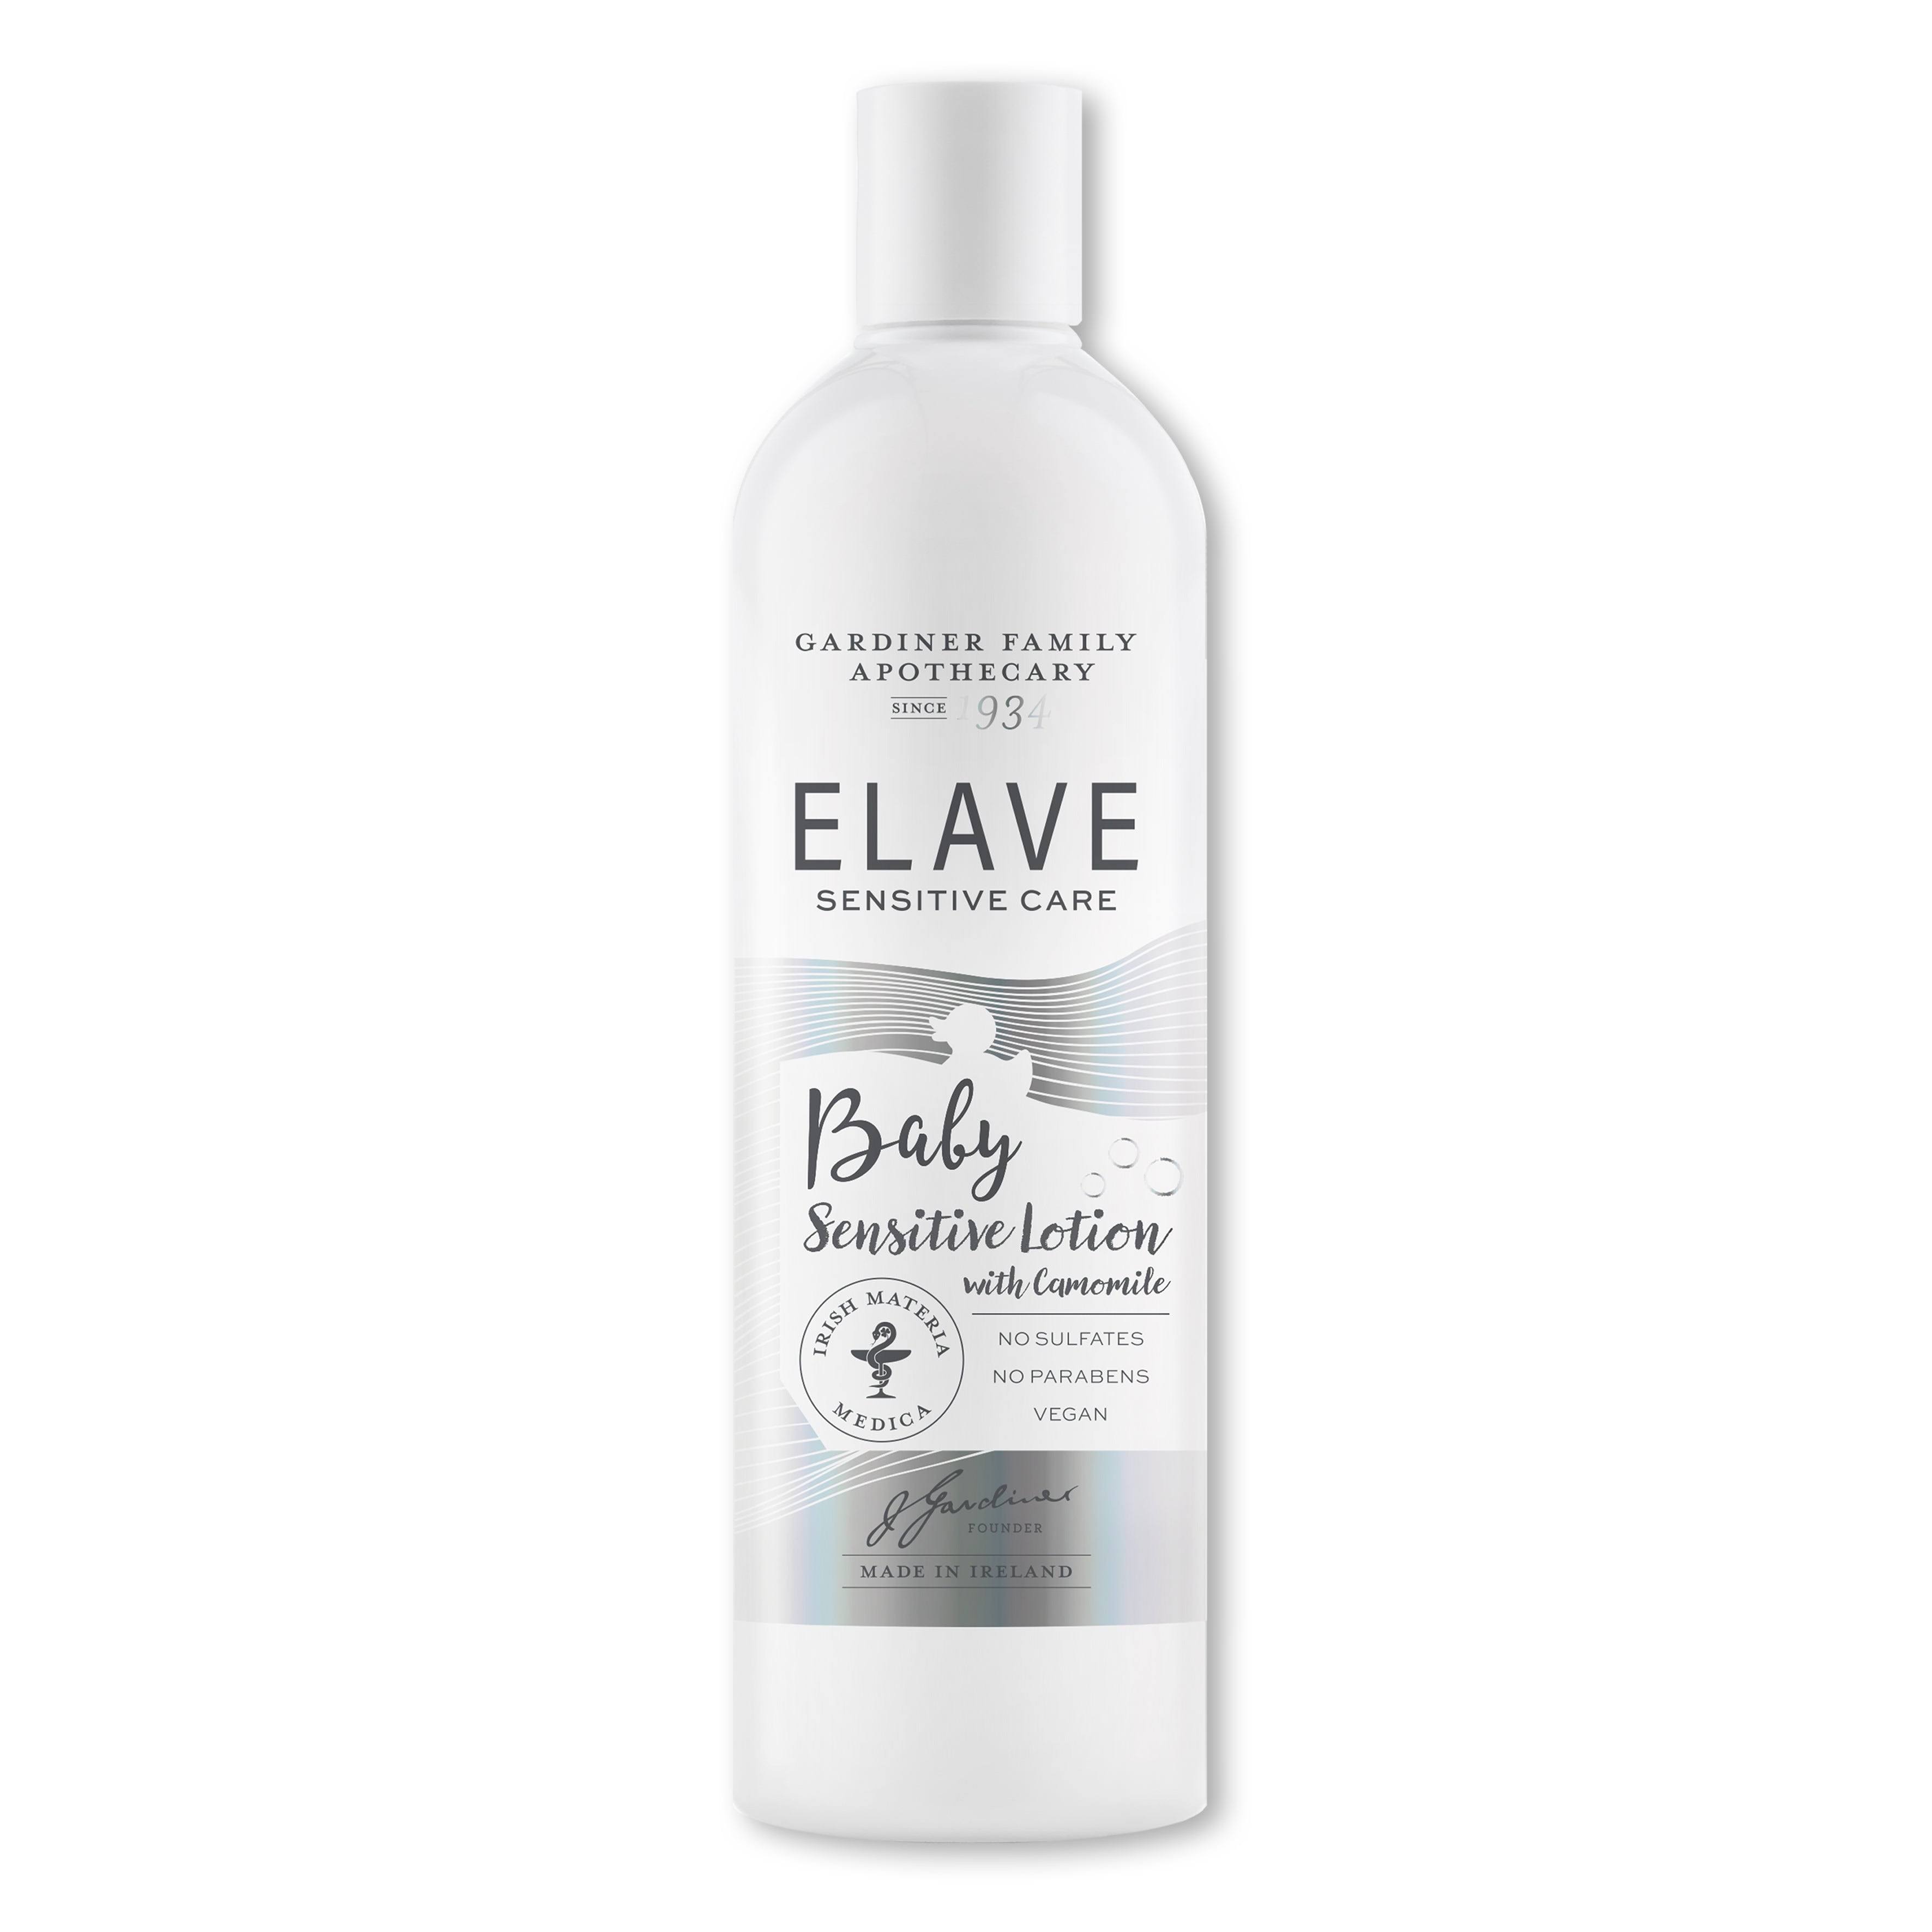 Elave - Baby Lotion (250ml)